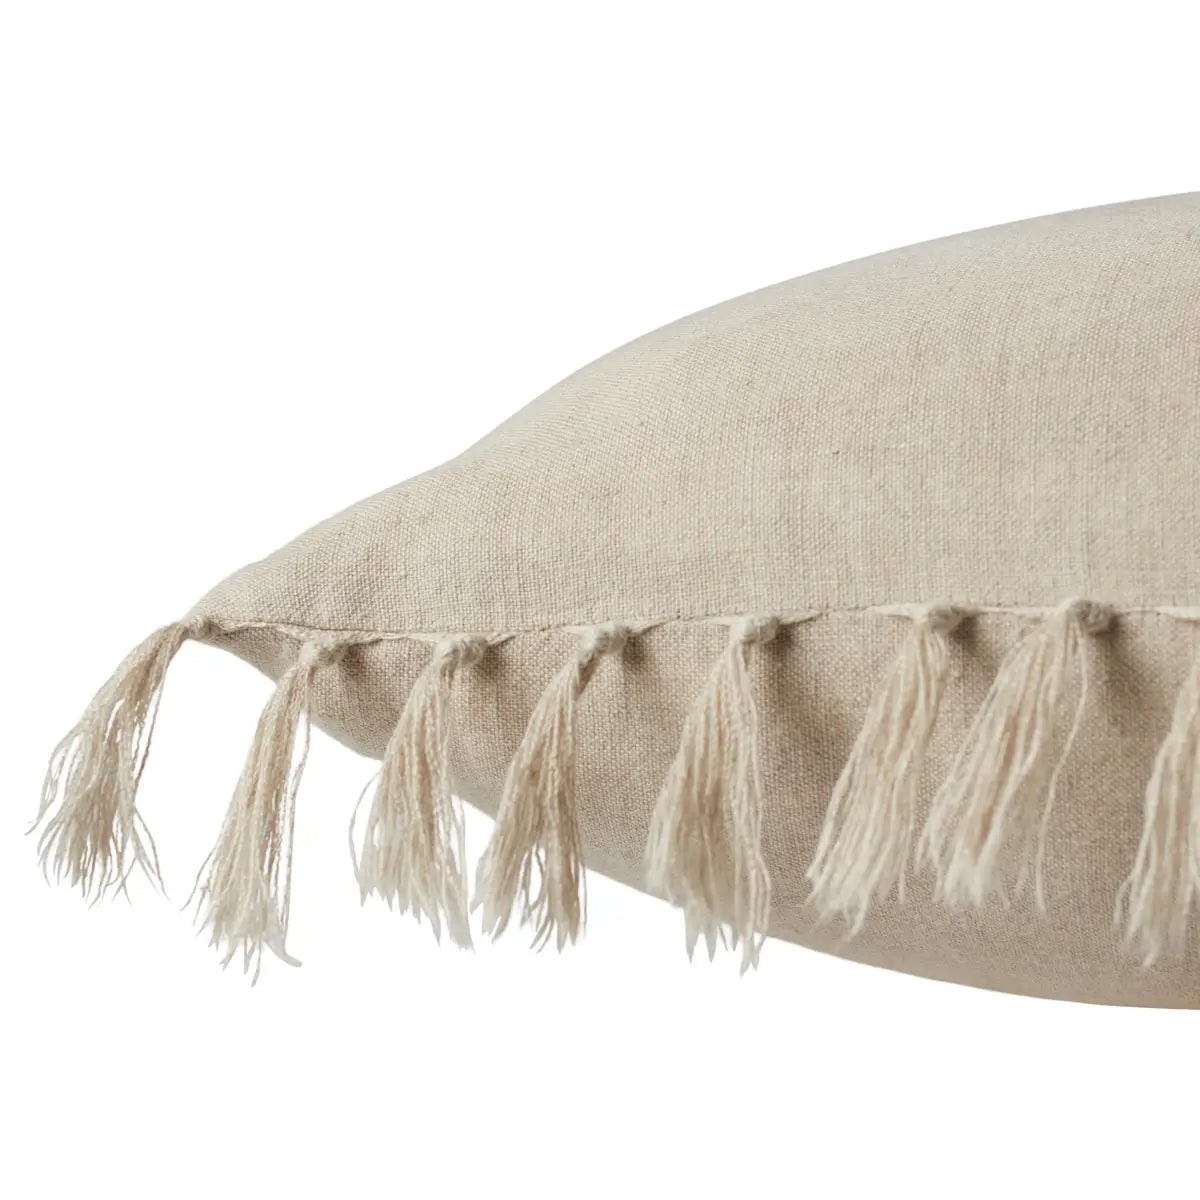 The Jemina Feather Gray Pillow boasts an assortment of relaxed linen designs with rustic-style knotted tassels lining the sides. The comfortable Majere throw pillow delights with an on-trend gray hue and subtle bohemian vibe that perfectly accents sofas, chairs, and beds alike. This casual yet sophisticated pillow thrives in indoor spaces of the home such as sitting rooms, living areas, and bedrooms. Amethyst Home provides interior design services, furniture, rugs, and lighting in the Omaha metro area.